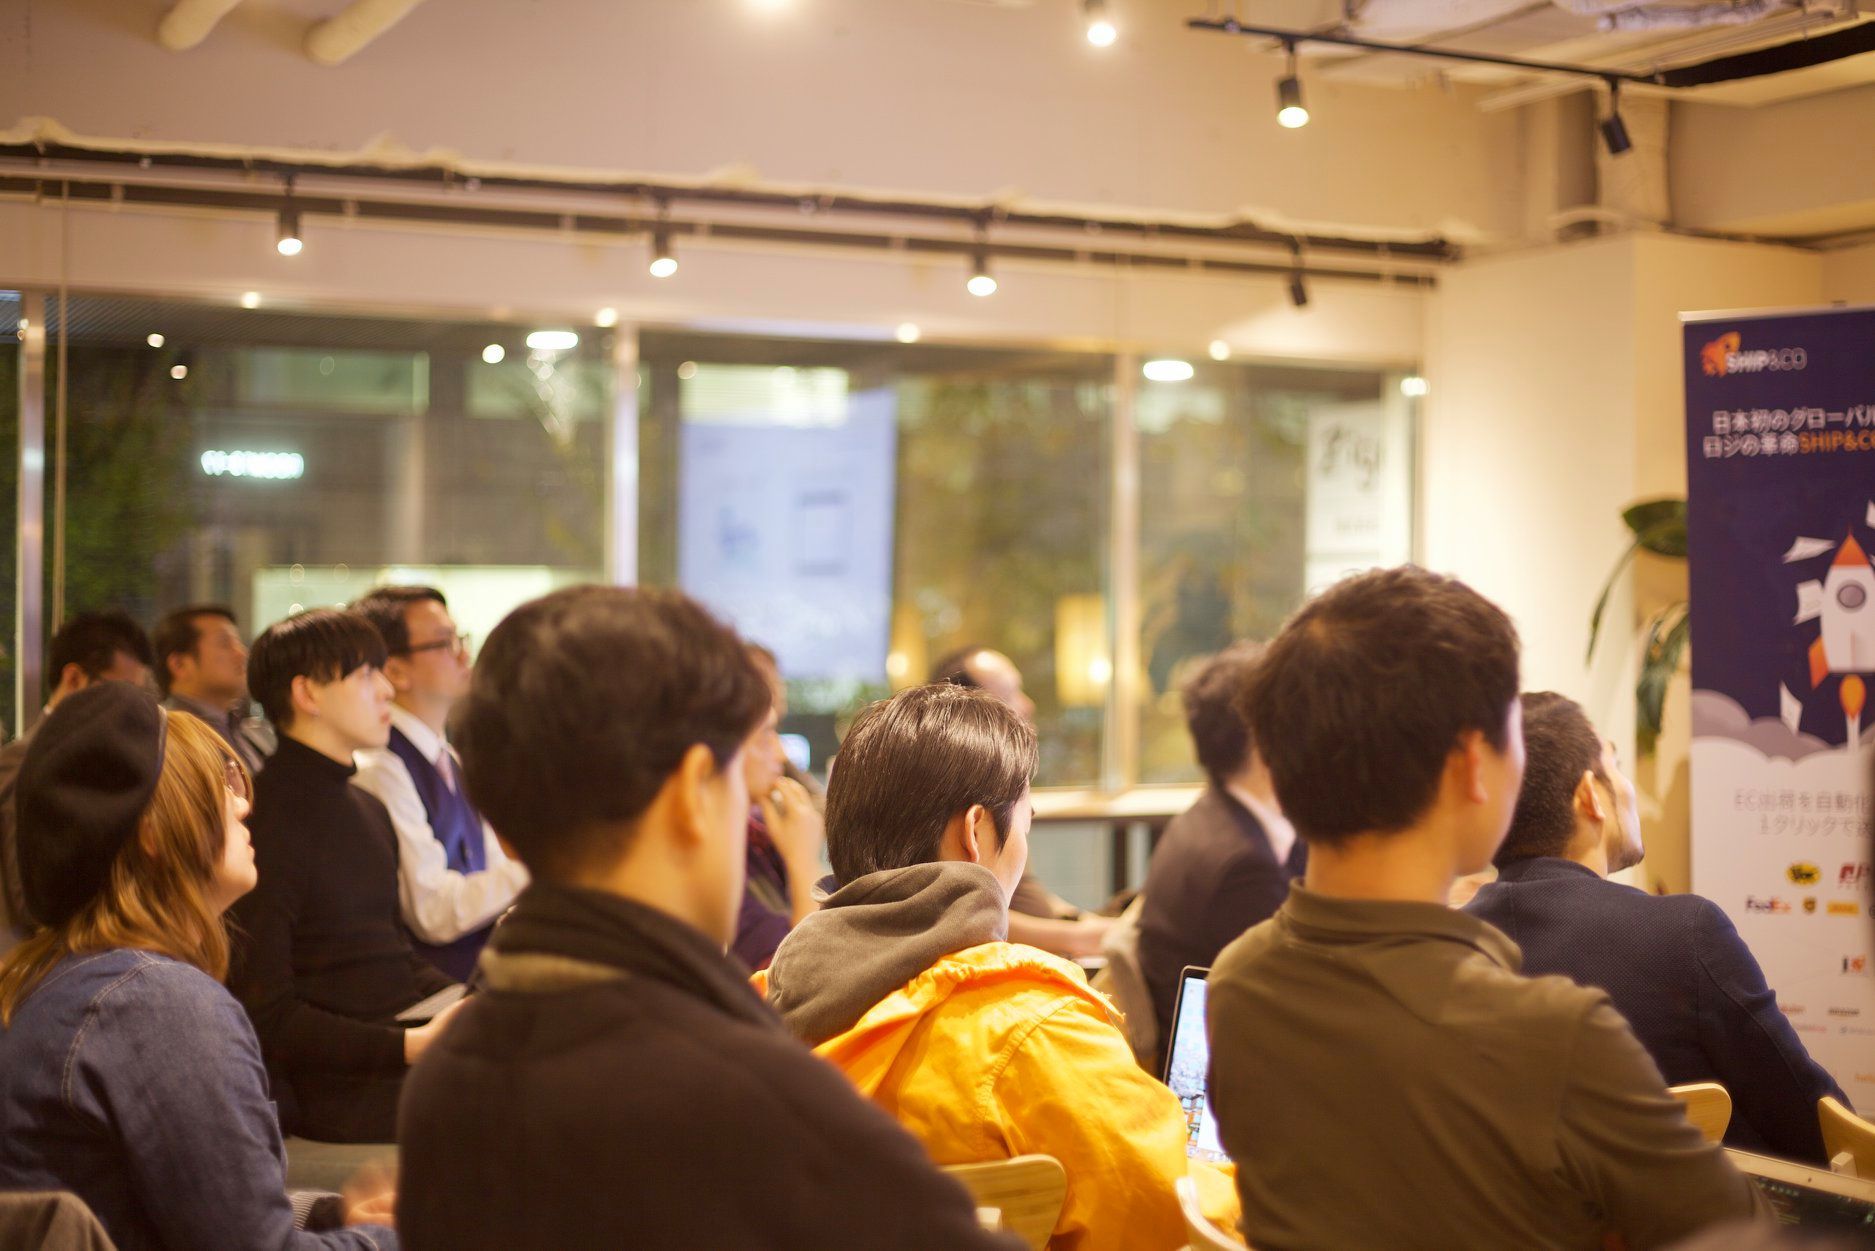 Event report: 3rd Shopify Meetup by Ship&co in Kyoto, Japan